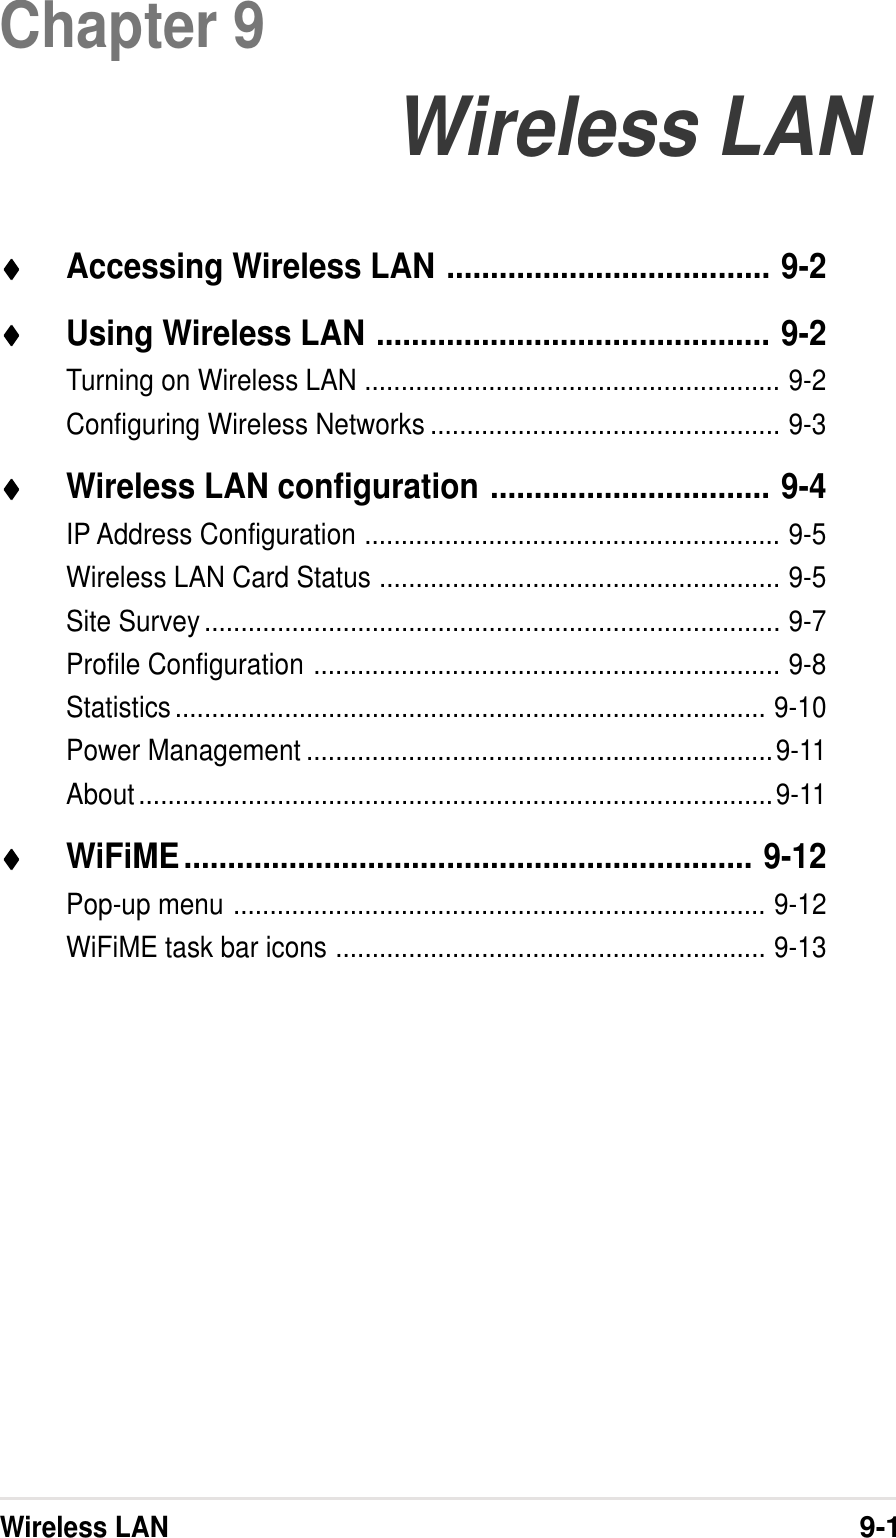 Wireless LAN9-1Chapter 9Wireless LAN♦♦♦♦♦Accessing Wireless LAN ..................................... 9-2♦♦♦♦♦Using Wireless LAN ............................................. 9-2Turning on Wireless LAN ......................................................... 9-2Configuring Wireless Networks ................................................ 9-3♦♦♦♦♦Wireless LAN configuration ................................ 9-4IP Address Configuration ......................................................... 9-5Wireless LAN Card Status ....................................................... 9-5Site Survey............................................................................... 9-7Profile Configuration ................................................................ 9-8Statistics................................................................................. 9-10Power Management ................................................................9-11About.......................................................................................9-11♦♦♦♦♦WiFiME................................................................. 9-12Pop-up menu ......................................................................... 9-12WiFiME task bar icons ........................................................... 9-13